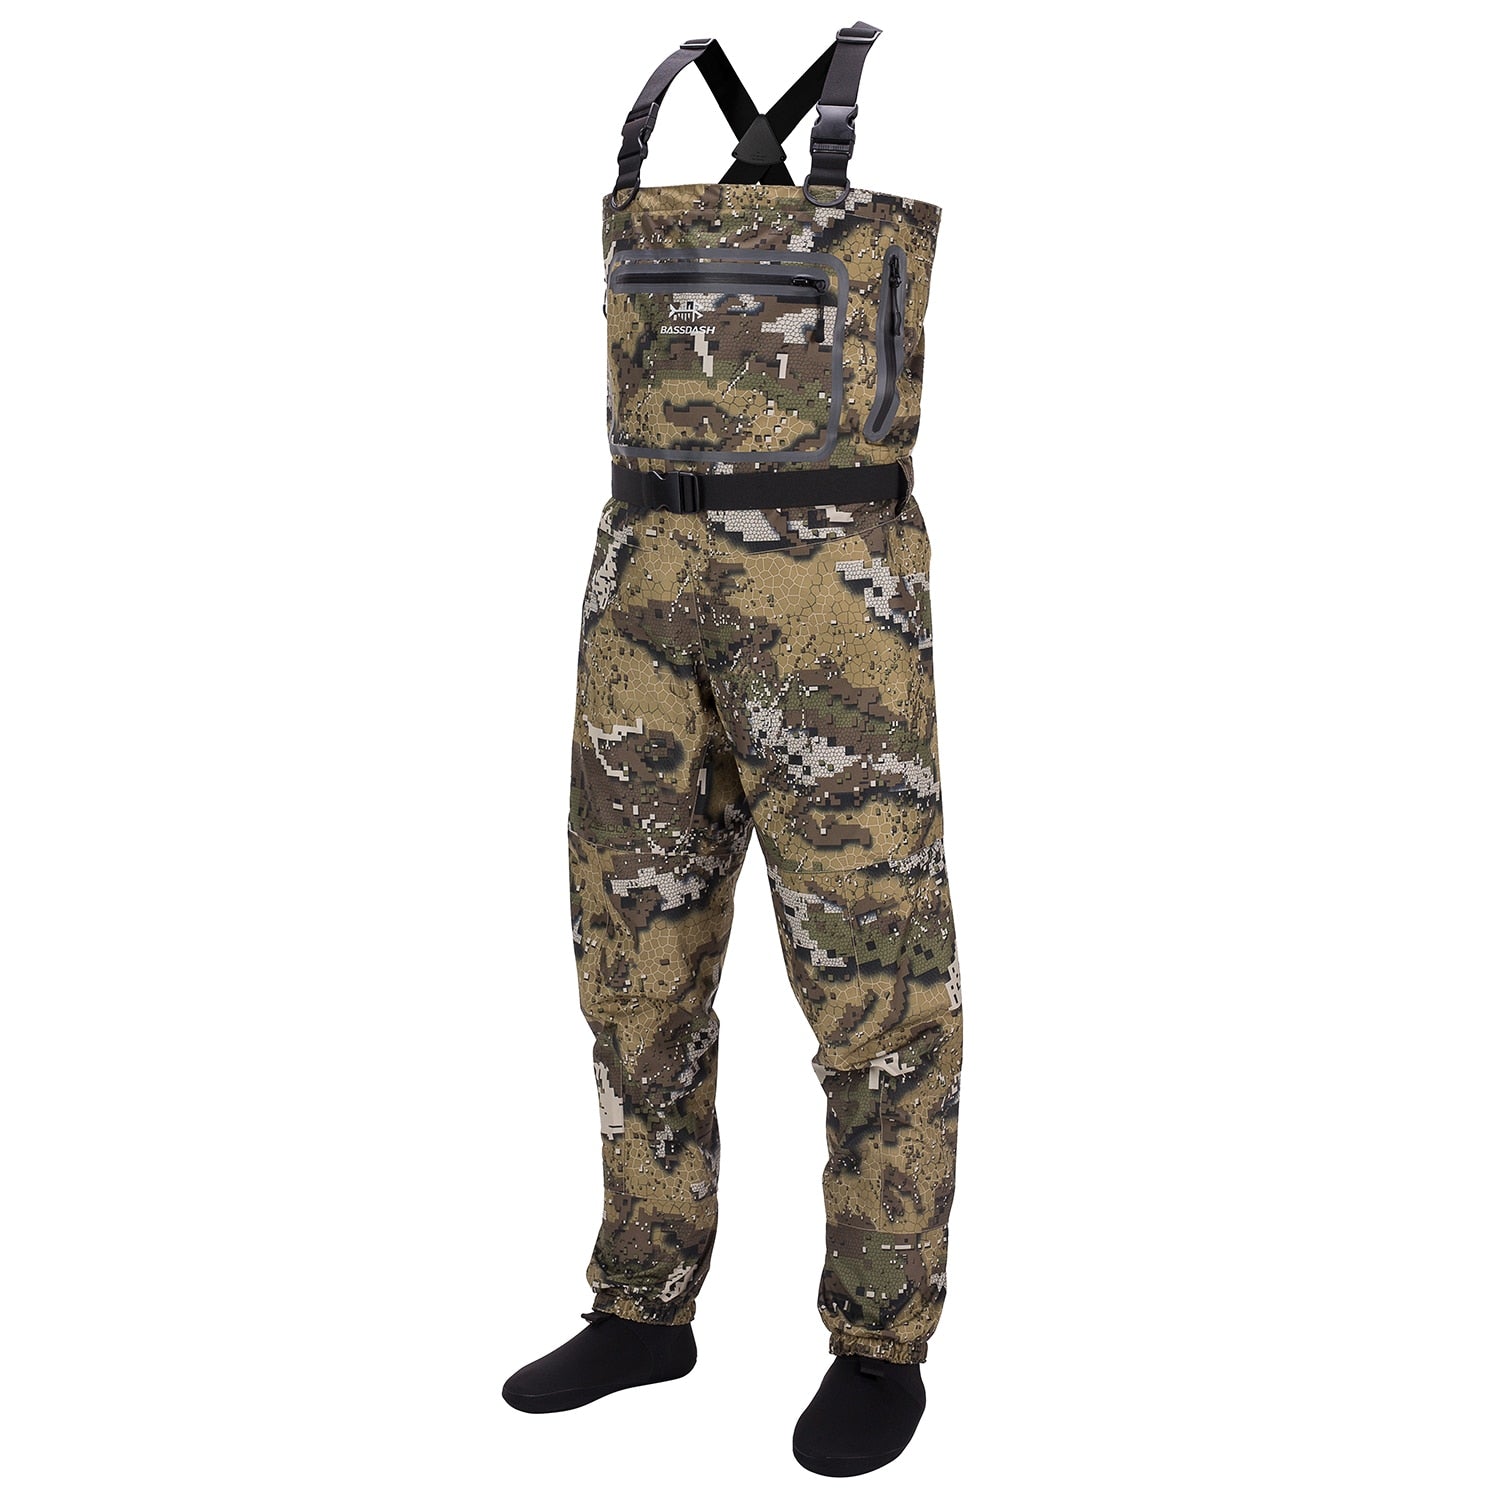 Bassdash Veil Camo Chest Stocking Foot Waders Breathable and Ultra